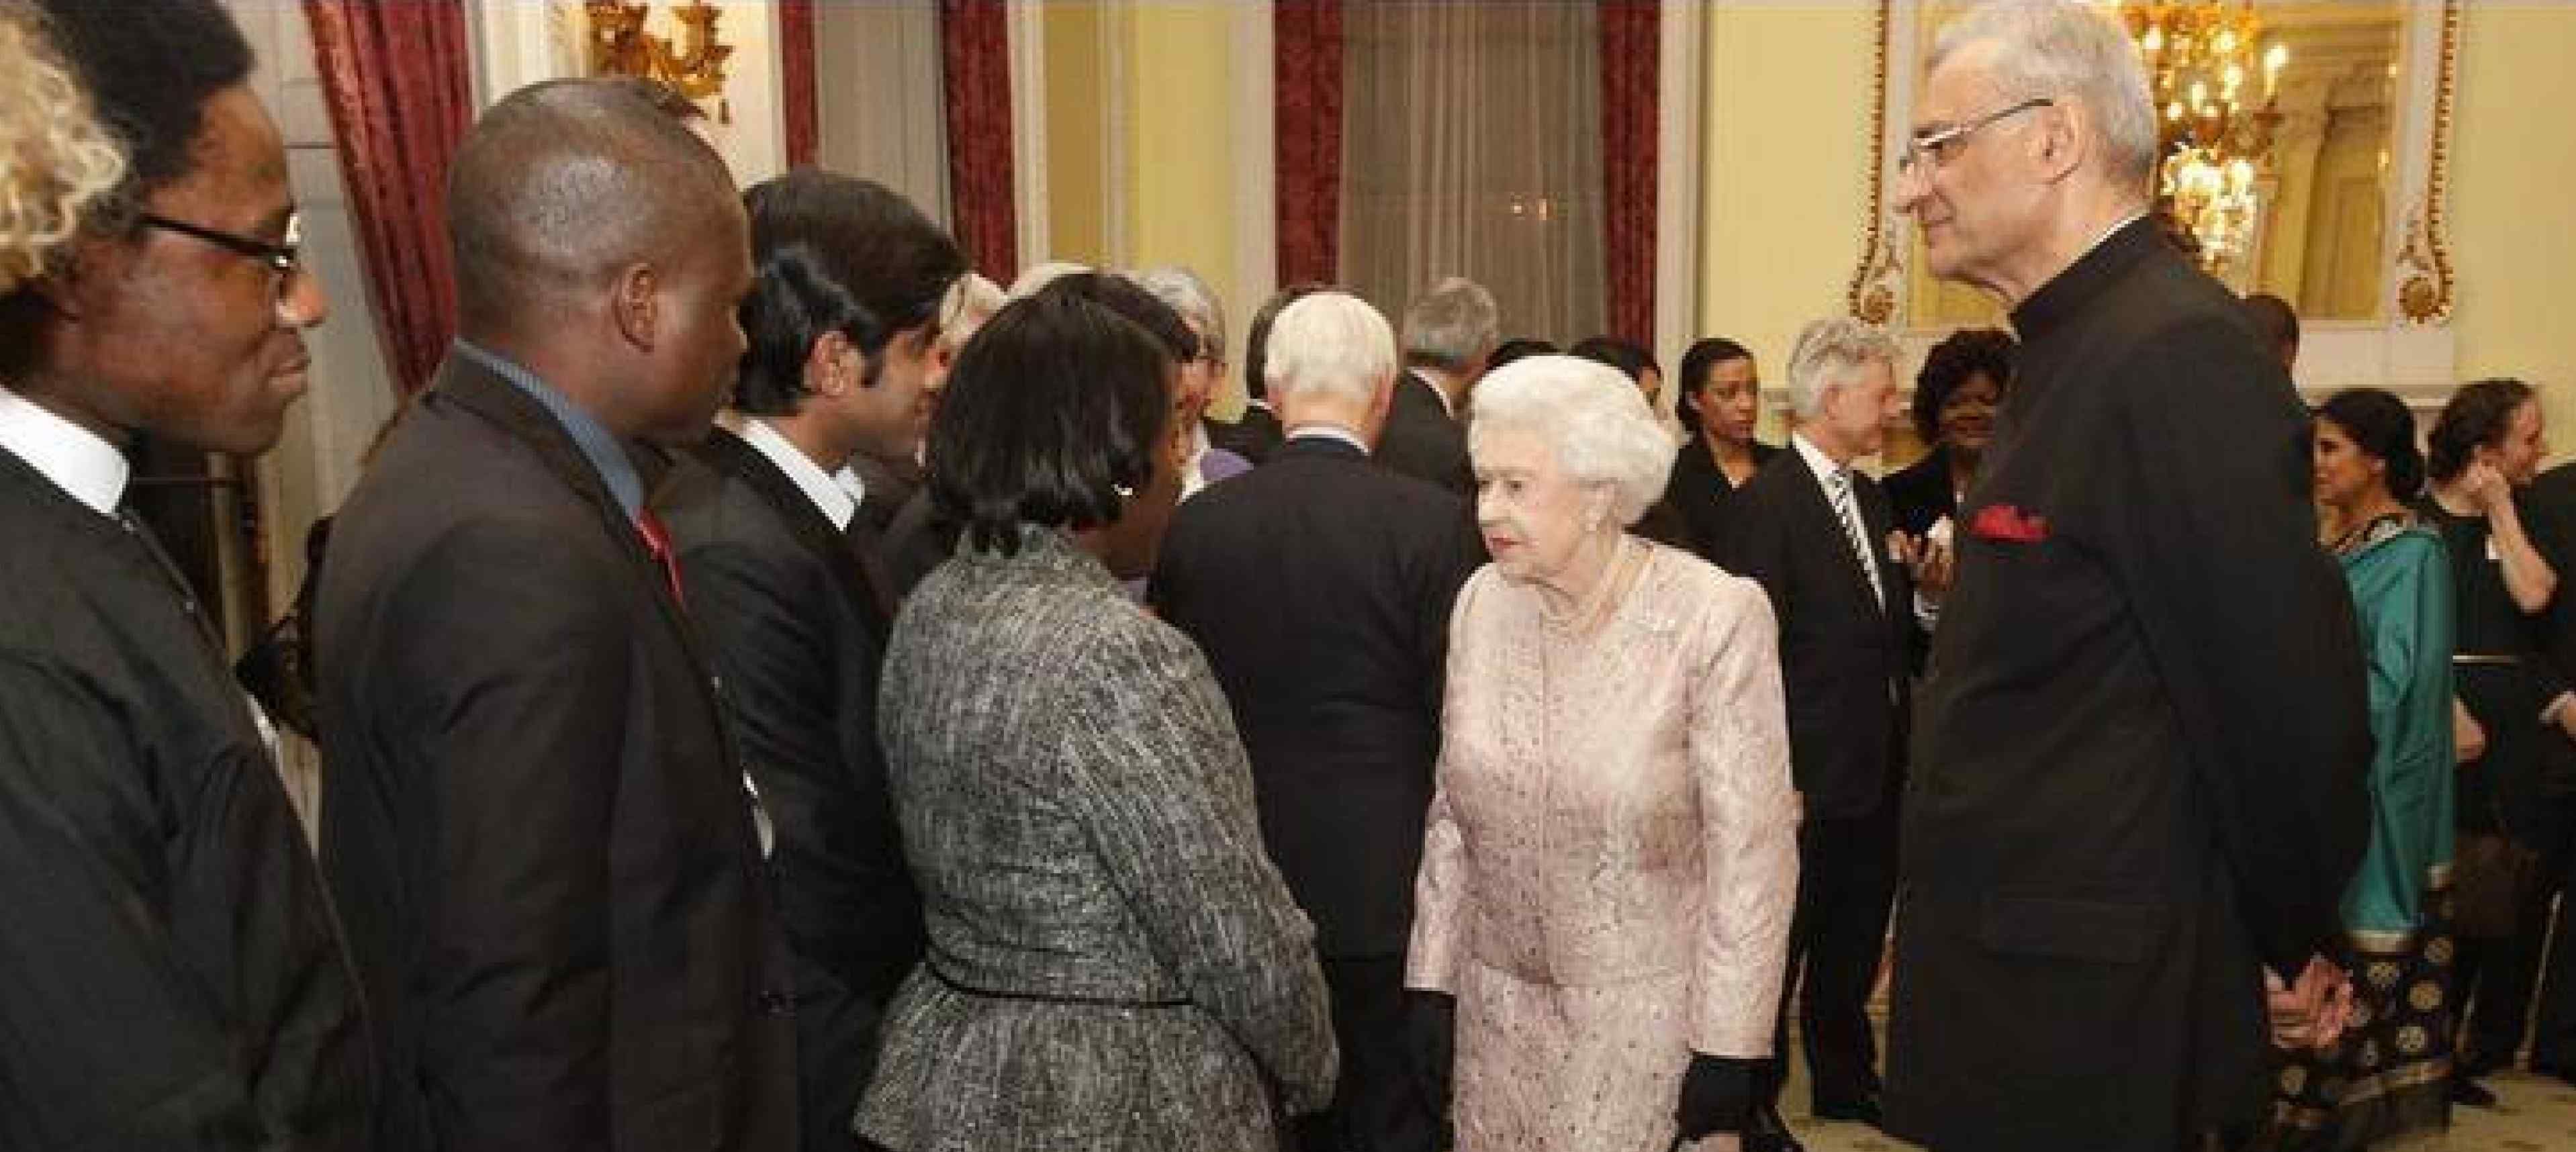 Commonwealth team meeting Her Majesty the Queen